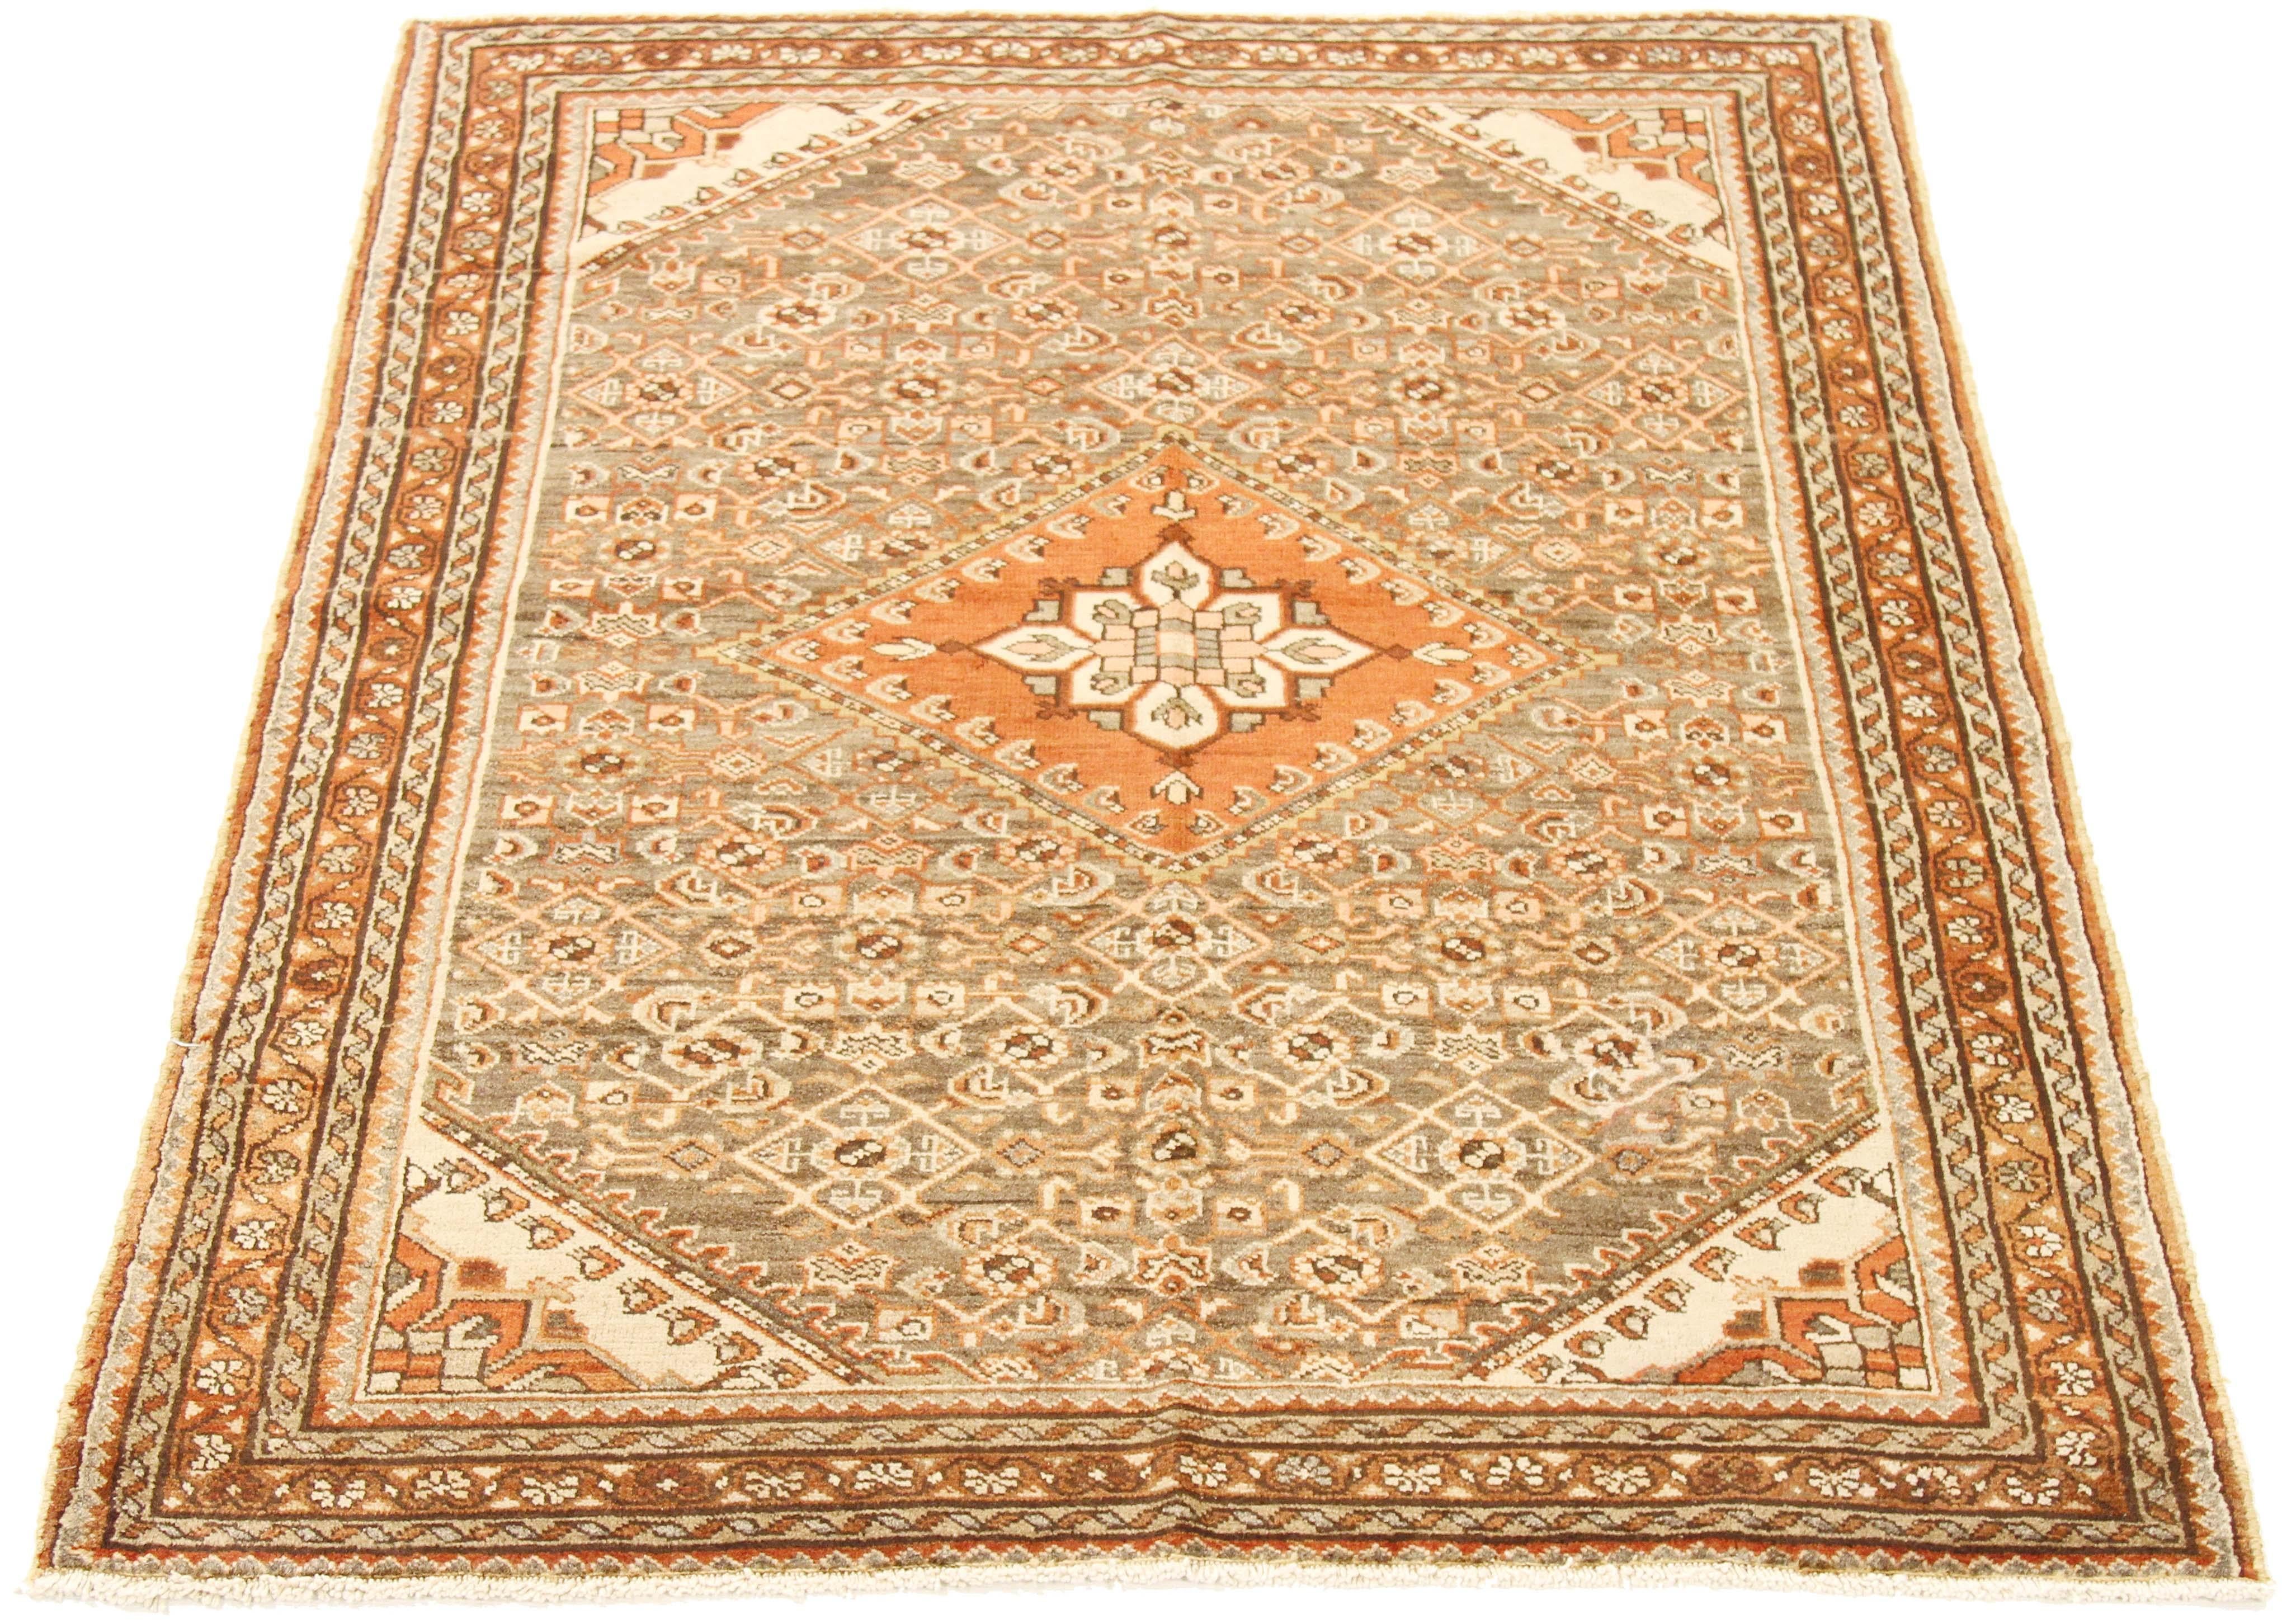 Antique Persian rug handwoven from the finest sheep’s wool and colored with all-natural vegetable dyes that are safe for humans and pets. It’s a traditional Borchalo design featuring a gorgeous botanical field highlighted by a brown and white